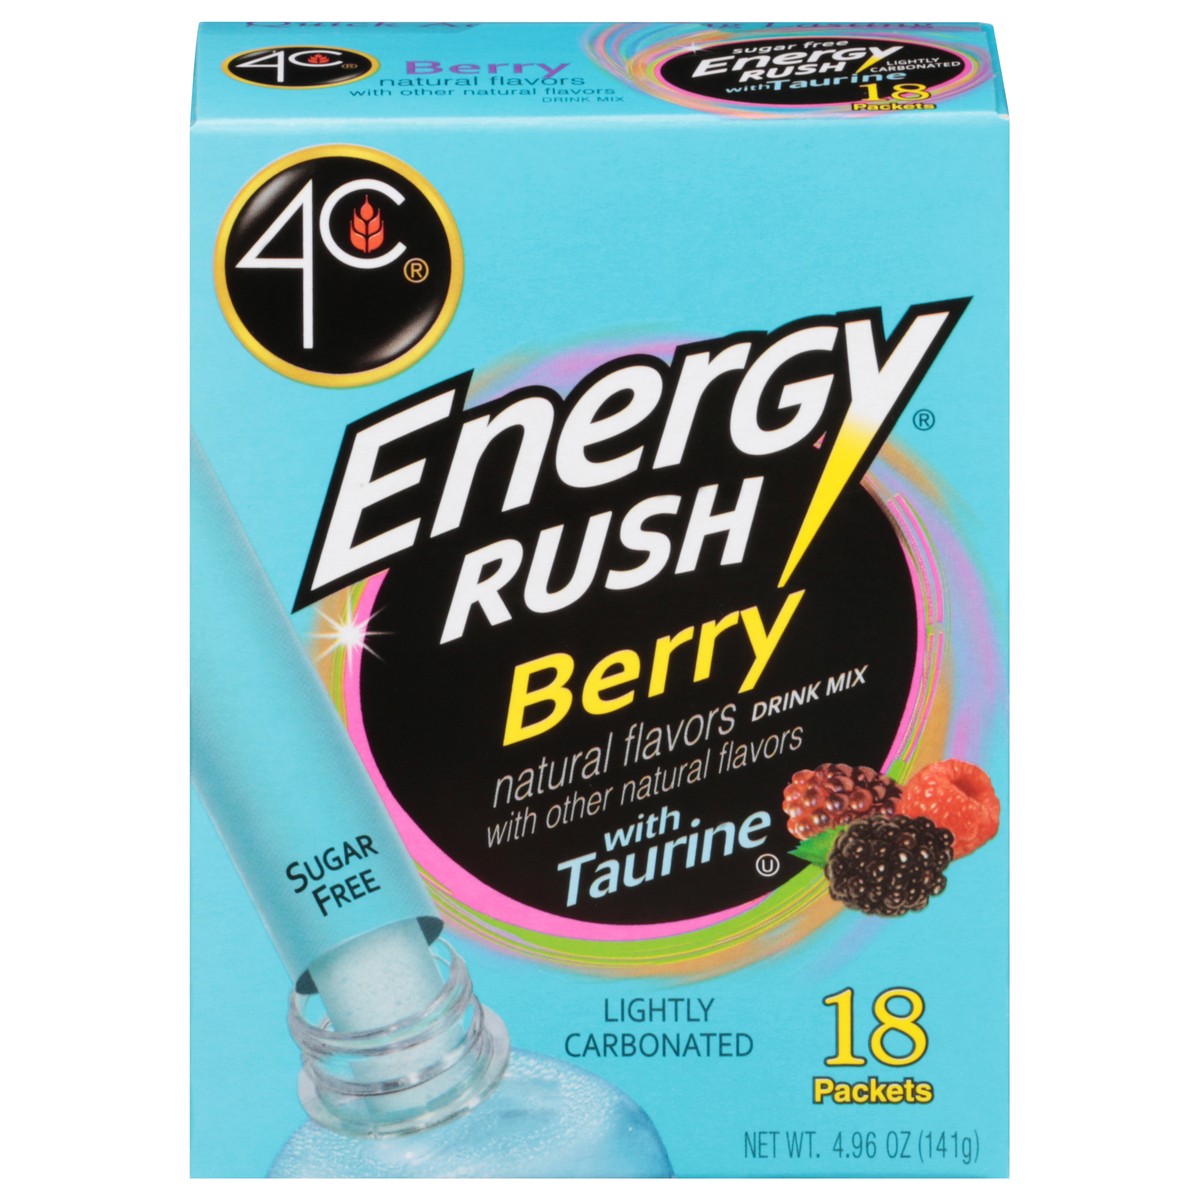 slide 1 of 14, 4C Drink Mix Sgr/Free Energy Rush Be, 18/4.96